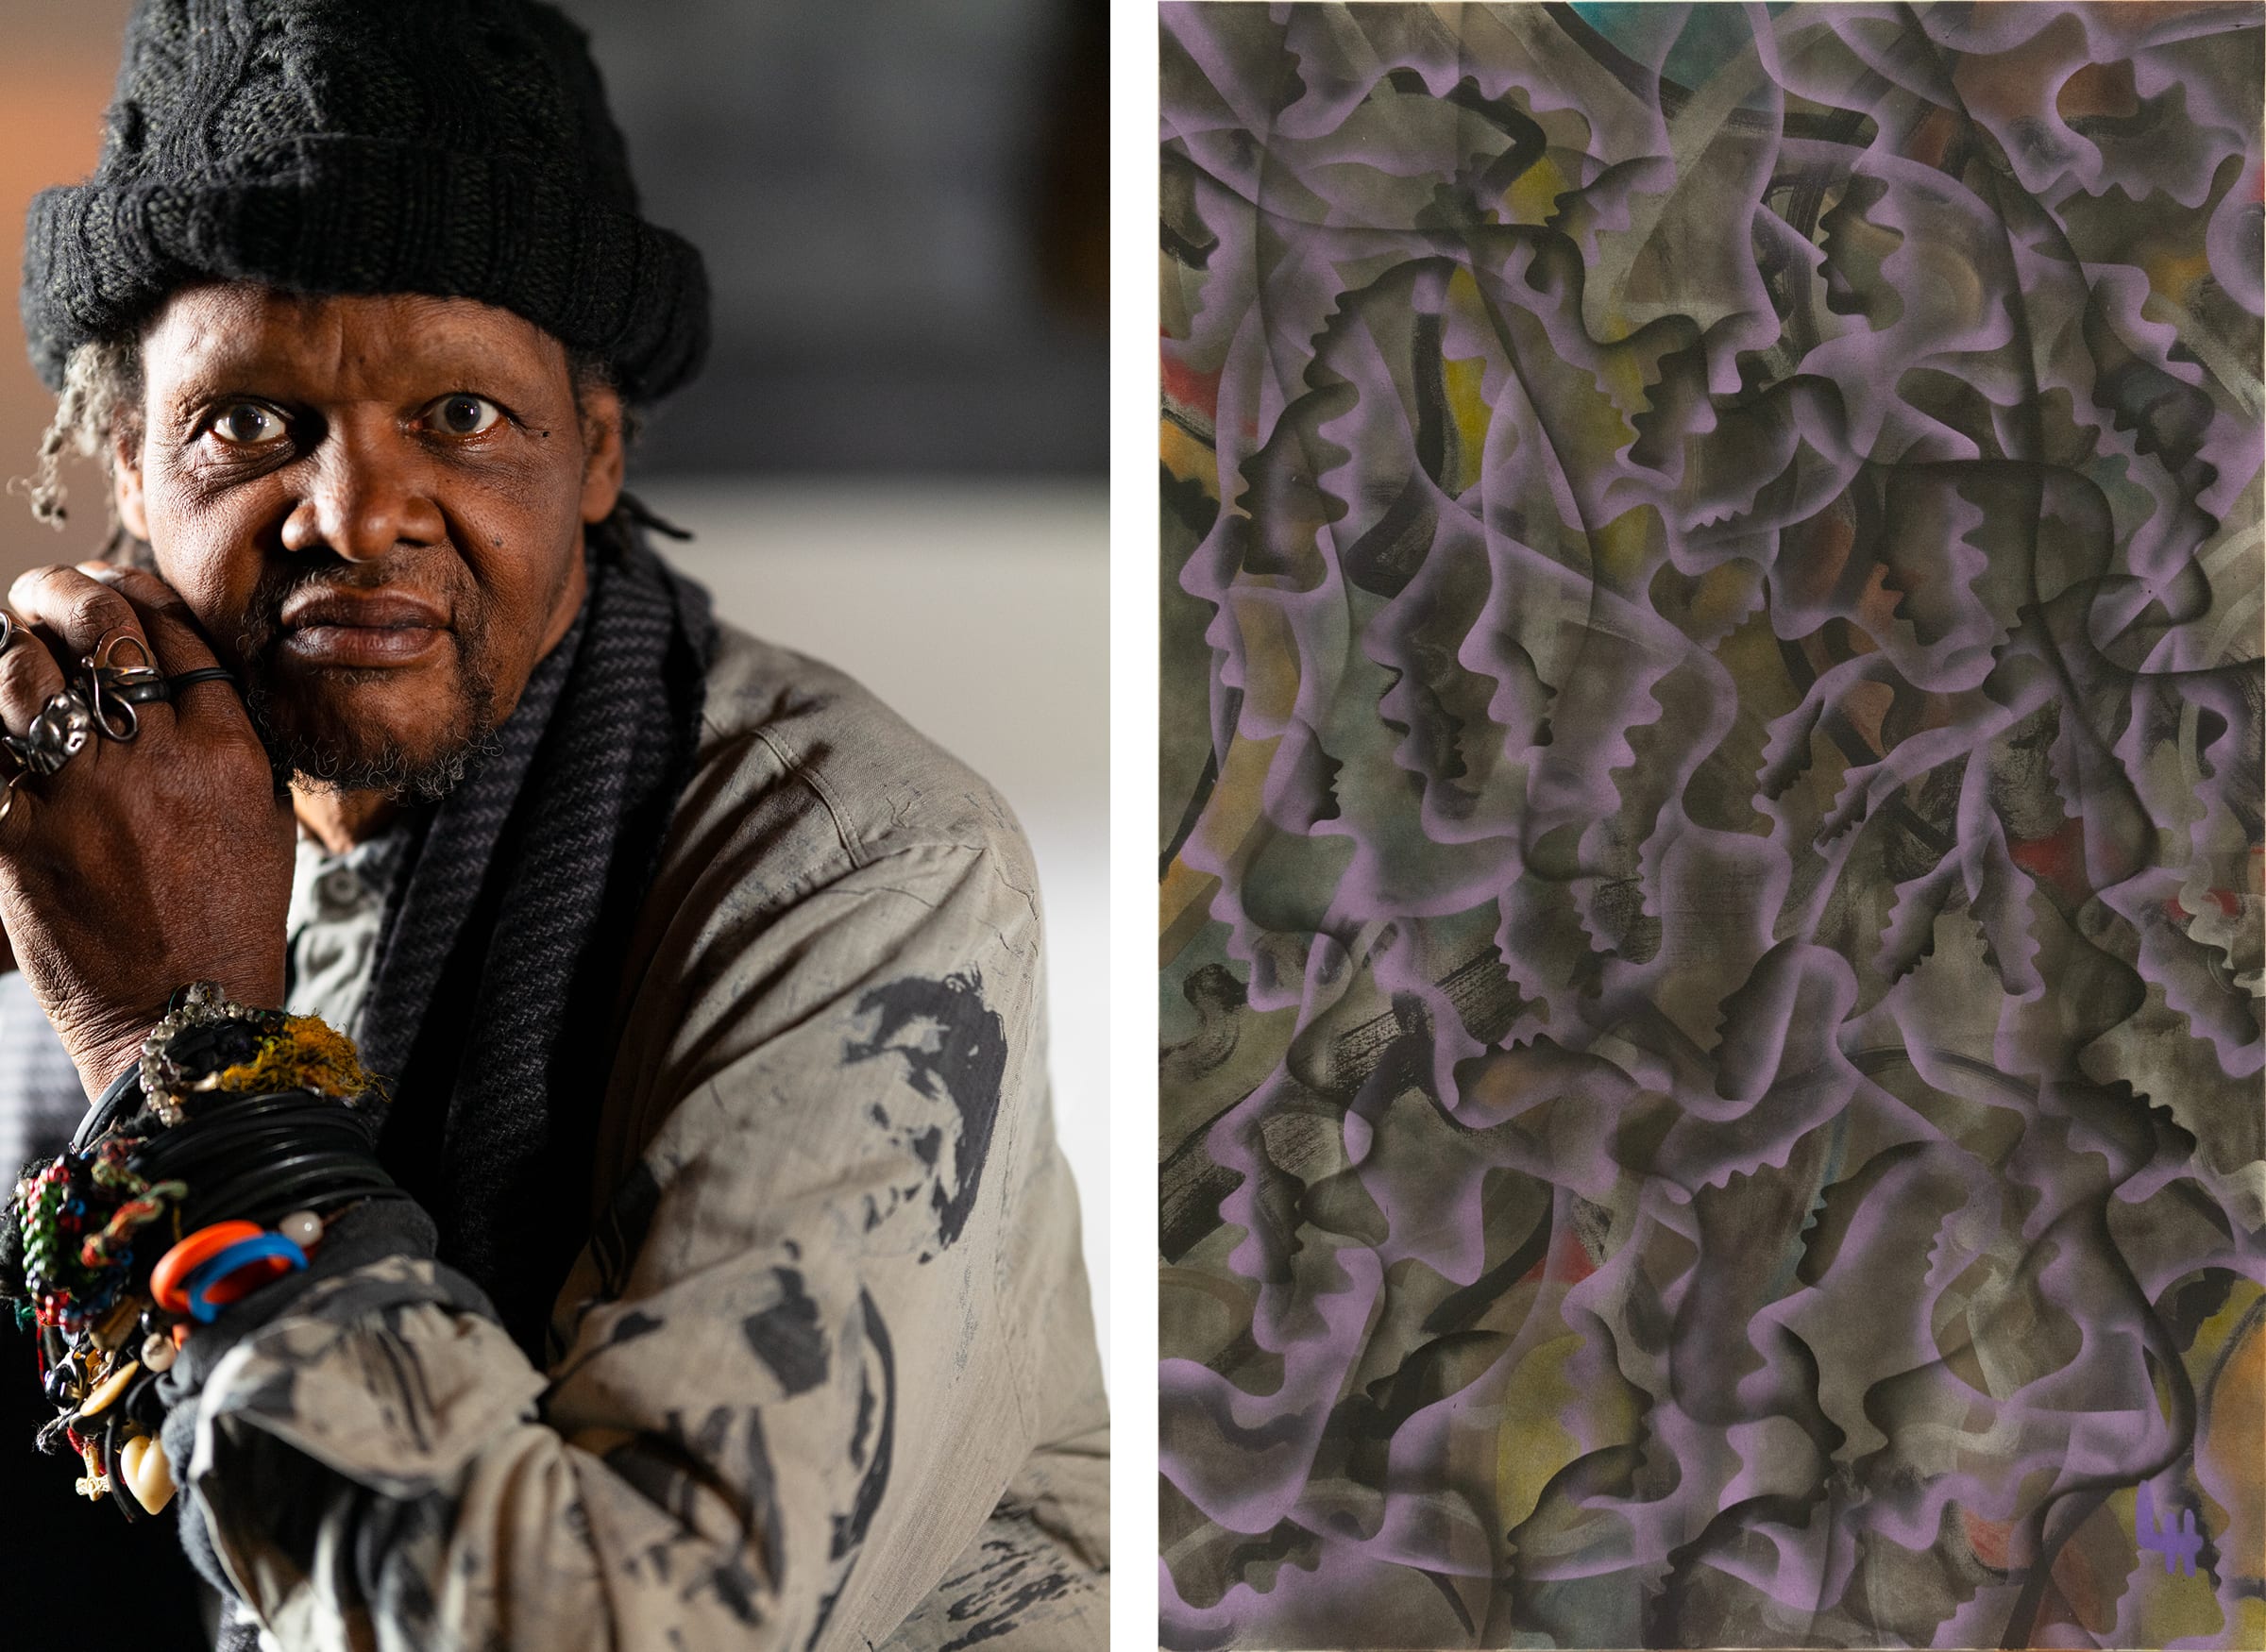 Left: Lonnie Holley. Photograph by David Raccuglia. Right: Lonnie Holley, The Light at the End of Our Darkness, 2023. Photograph by Truett Dietz. © Lonnie Holley / Artists Rights Society (ARS), New York. Courtesy of the artist and Blum & Poe.